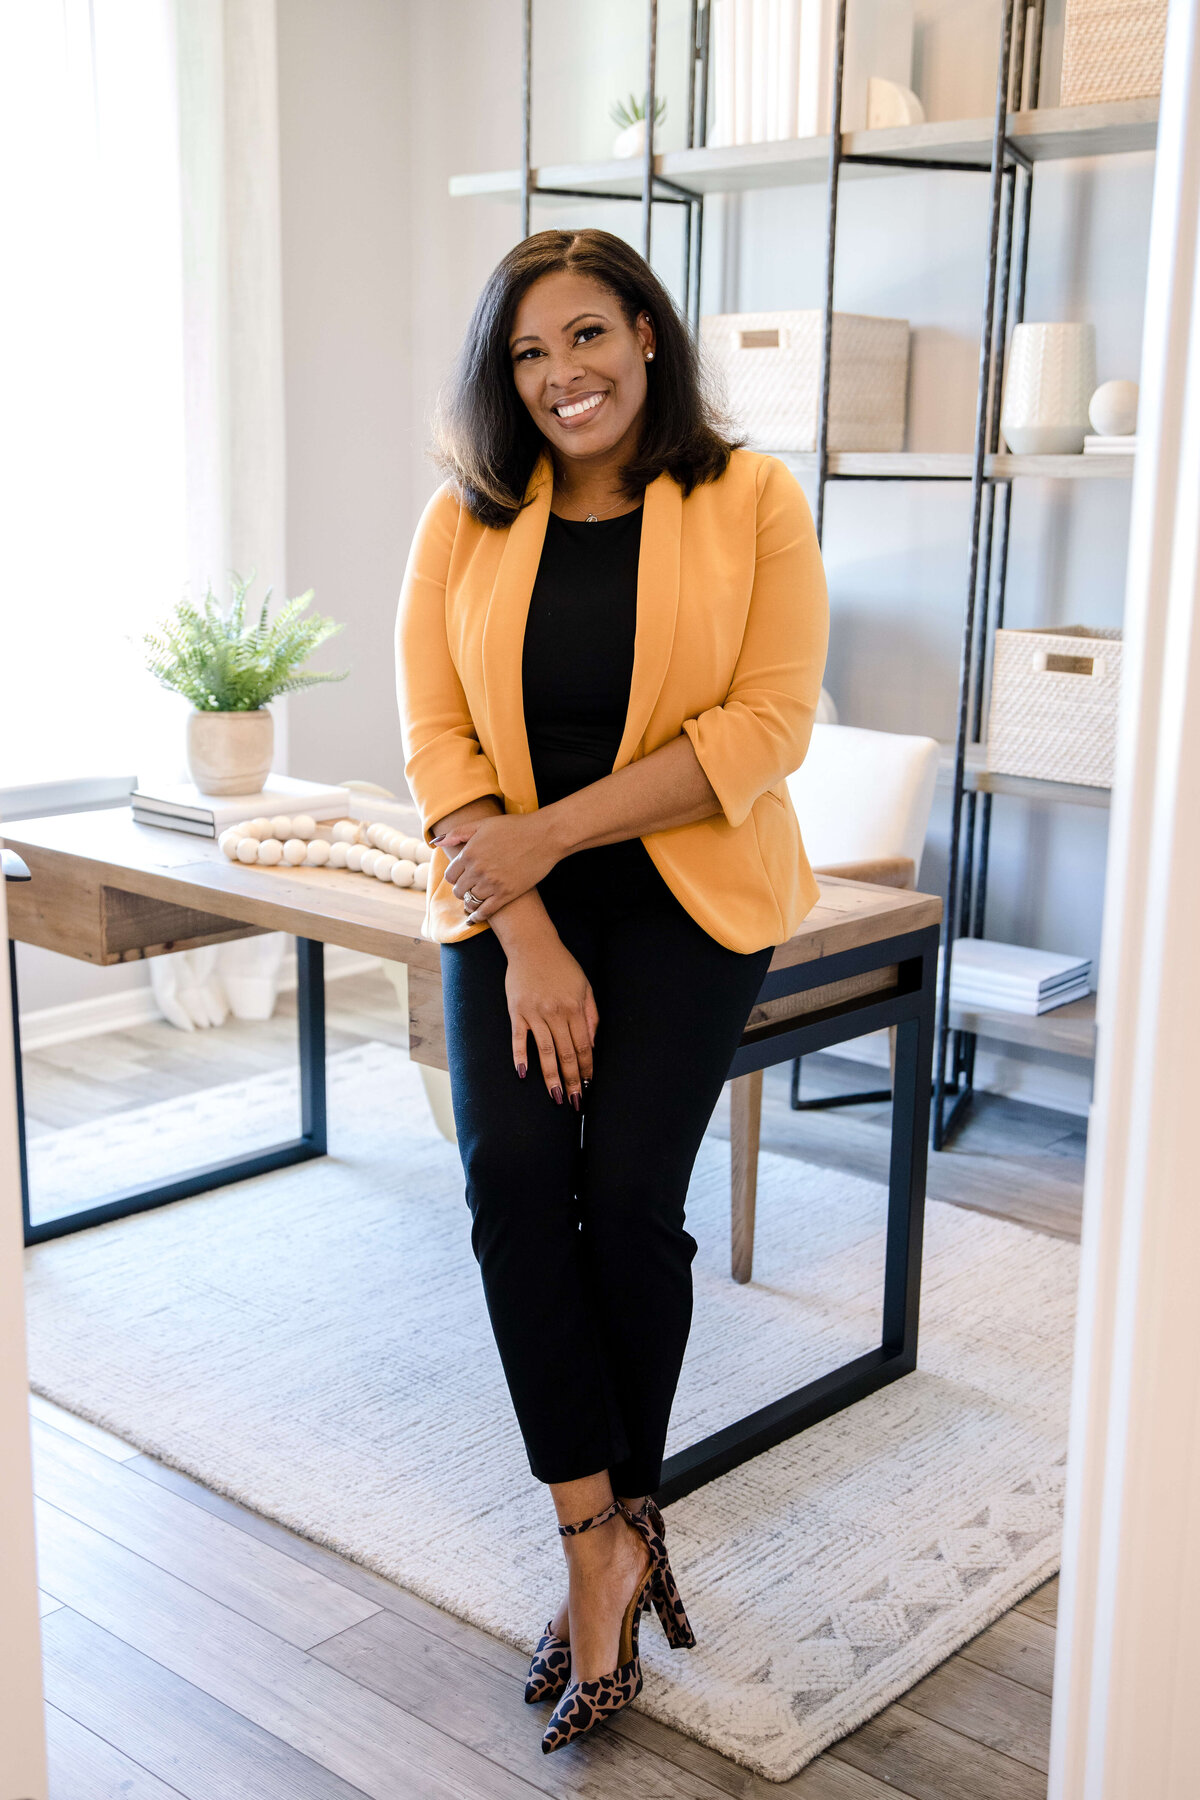 brand photography with woman in a yellow blazer standing next to her desk and resting on the ledge of the desk with her arms crossed as she smiles and poses photographed by Orlando photographer